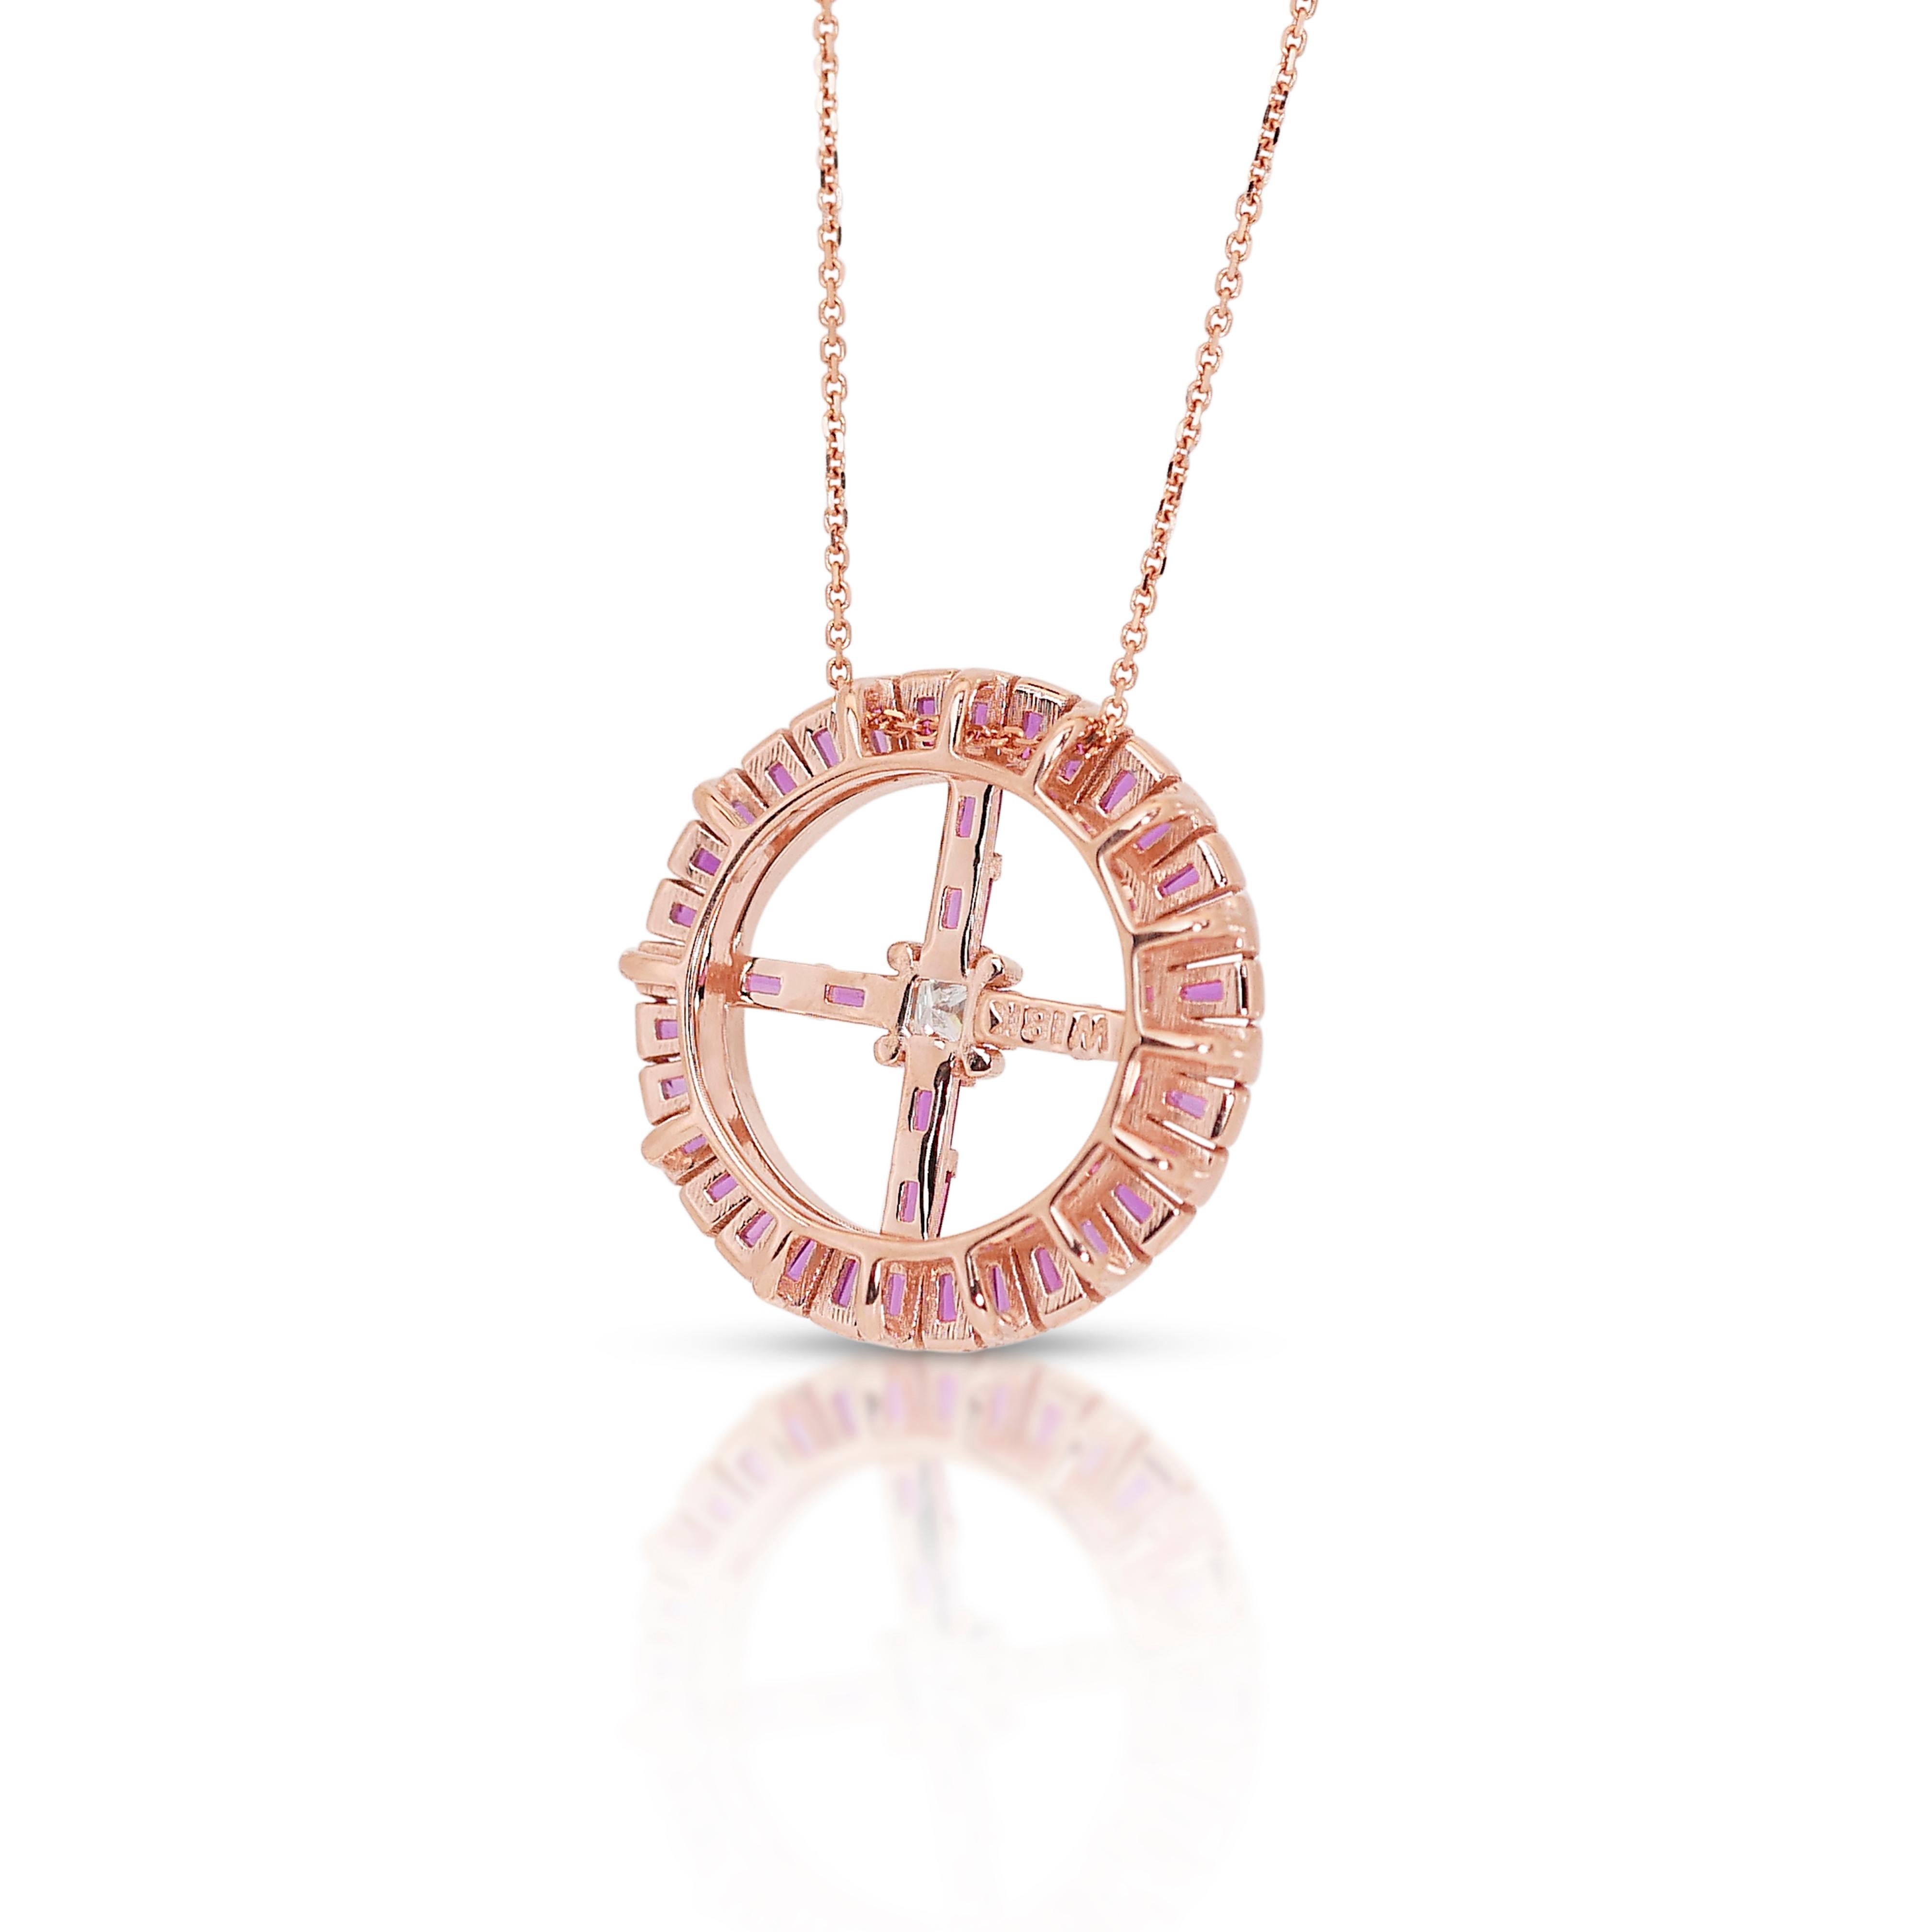 Dazzling 18K Rose Gold Diamond & Sapphire Necklace with 1.65 ct - AIG Certified For Sale 3